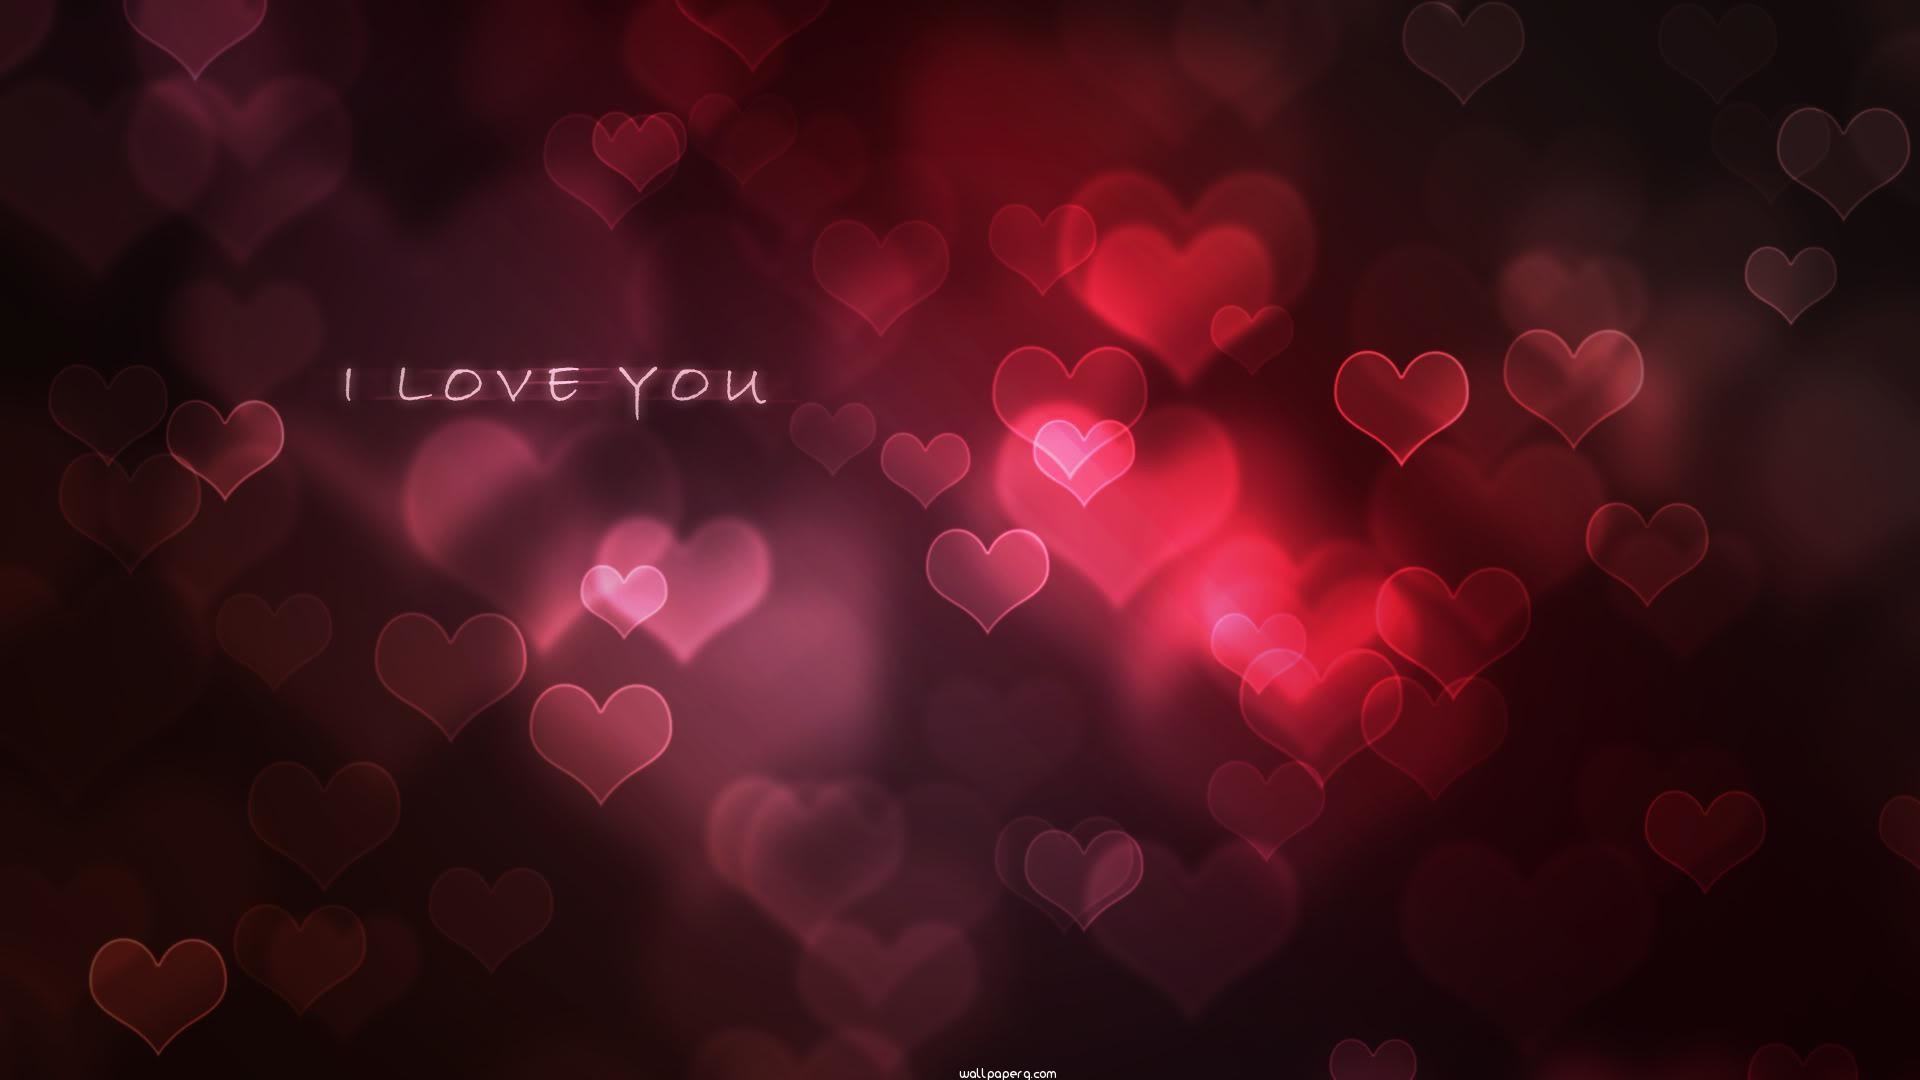 1920x1080 Download "Red hearts background image" wallpaper for mobile cell phone.